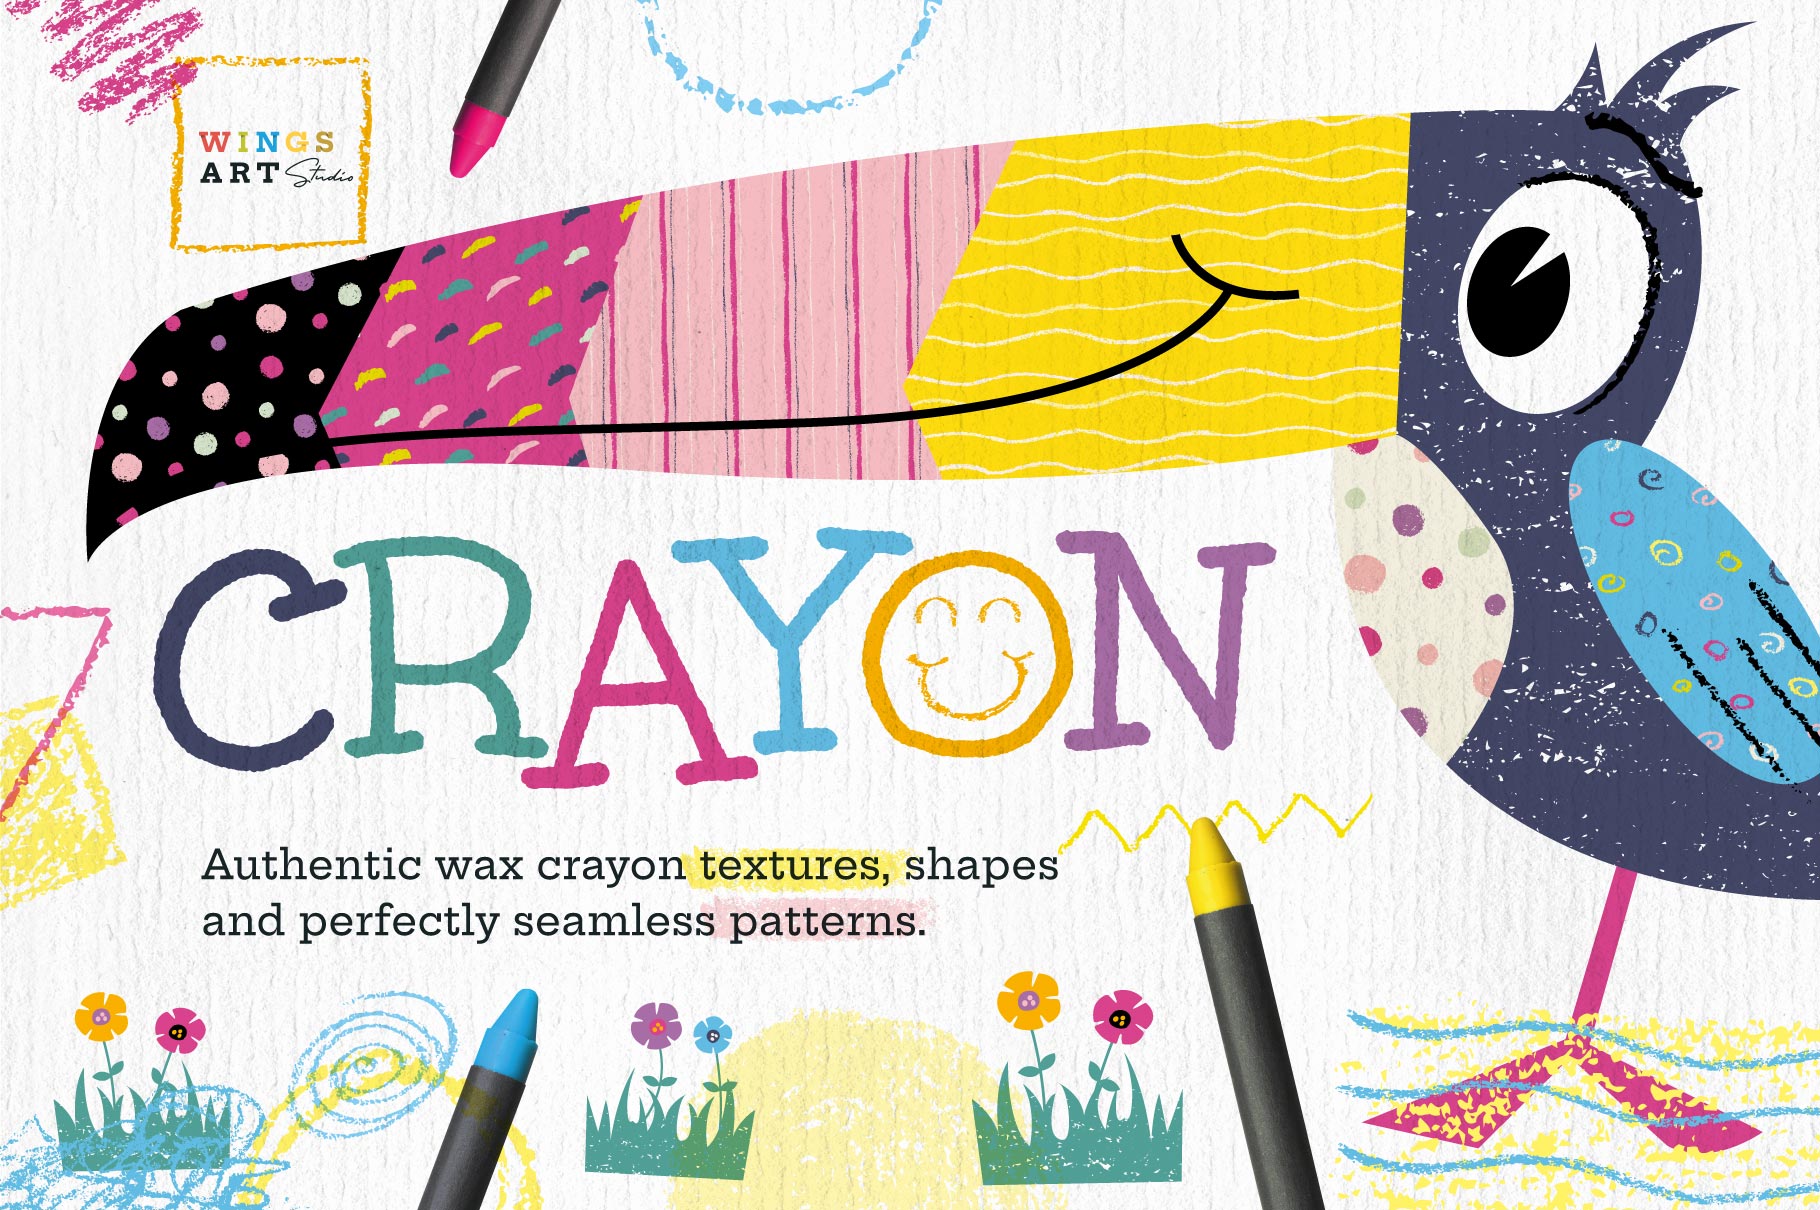 Crayon Textures and Brush Effects, plus Kids Patterns for Fabrics